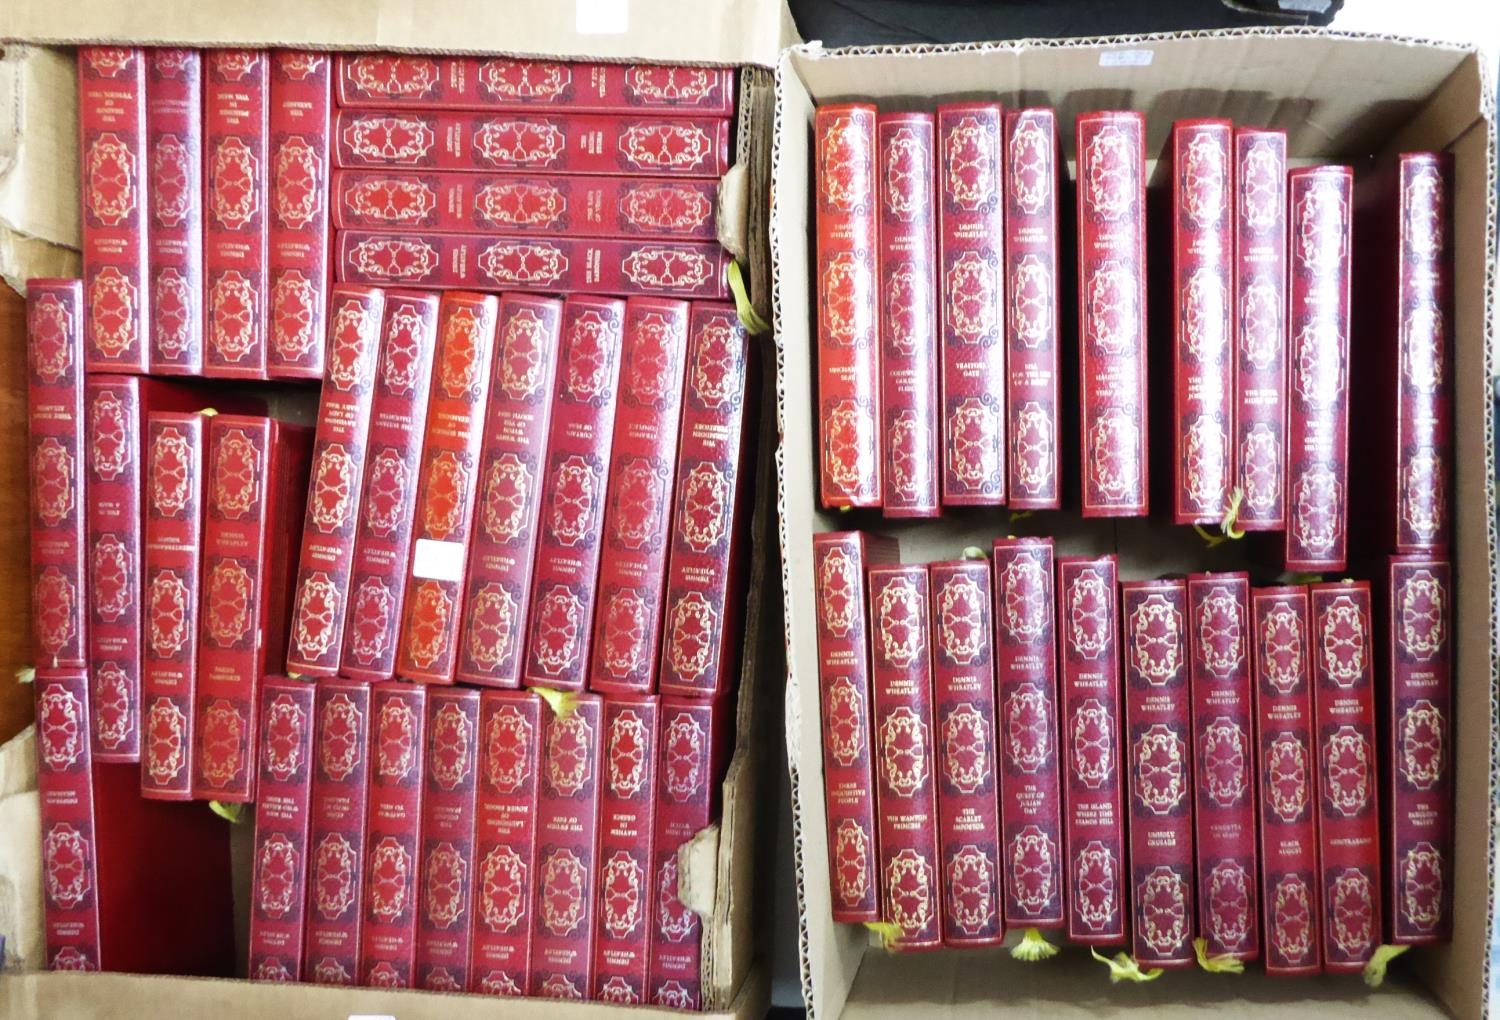 E3.S. PUBLICATIONS, CIRCA 1972, THE WORKS OF DENNIS WHEATLEY, 48 volumes, in uniform maroon gilt and